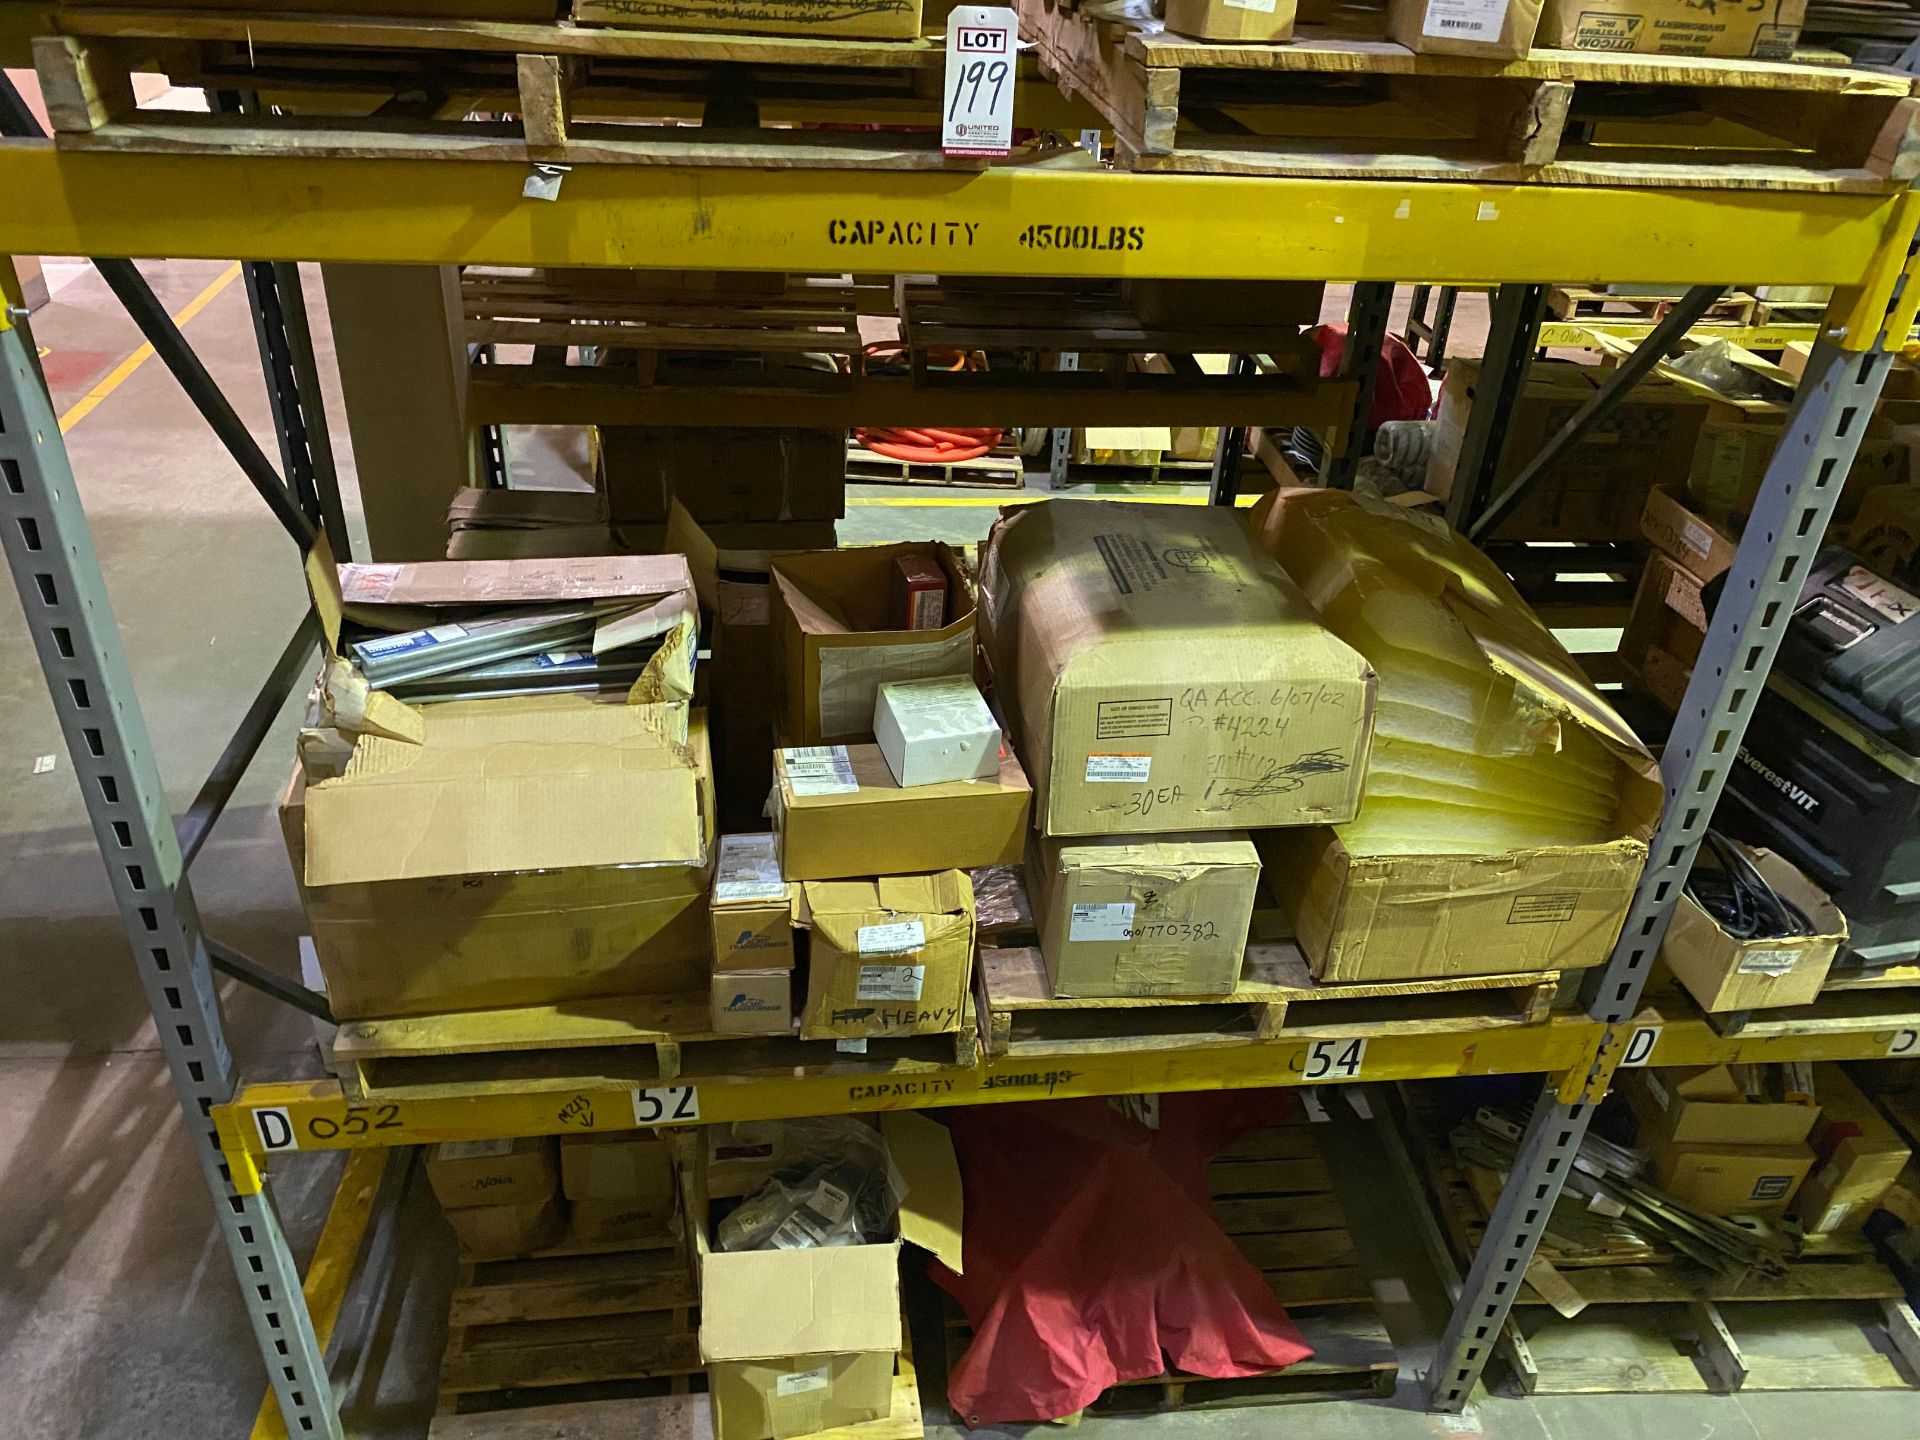 (10) PALLETS OF MAINTENANCE & REPAIR PARTS ON THE FLOOR AND (4) PALLET RACK SHELVES (NO SHELVING)